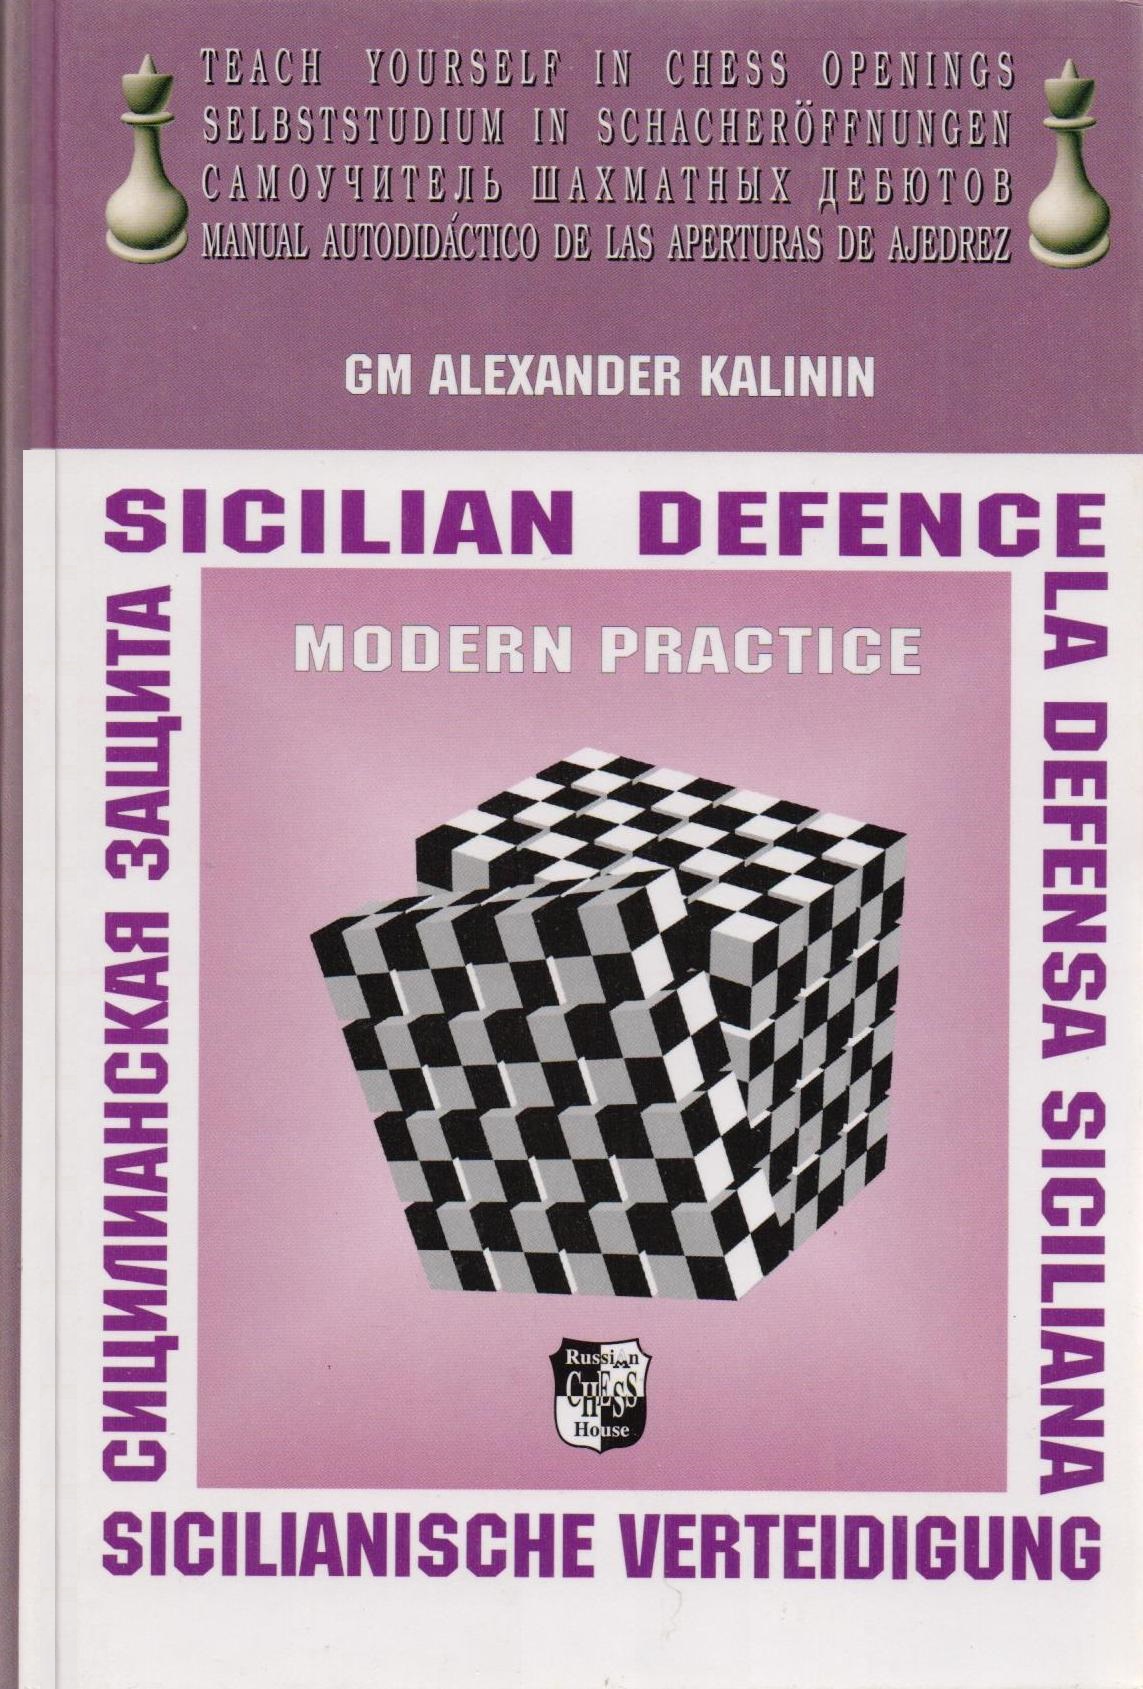 What is the Sicilian Defence?